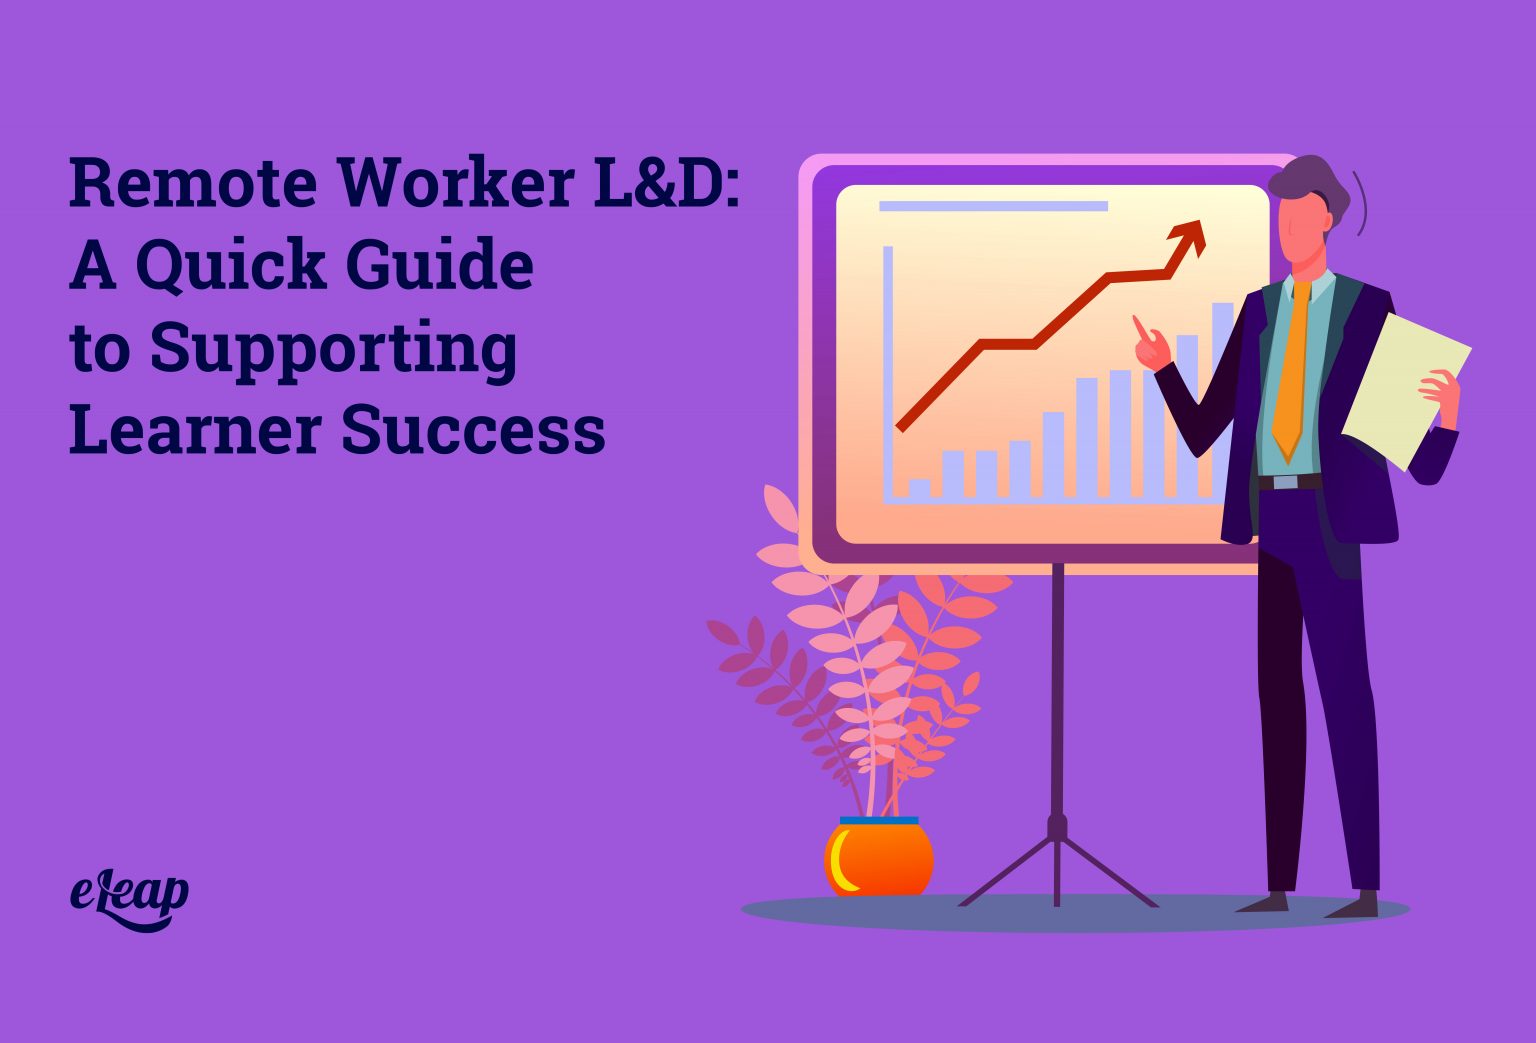 Remote Worker L&D A Quick Guide to Supporting Learner Success eLeaP